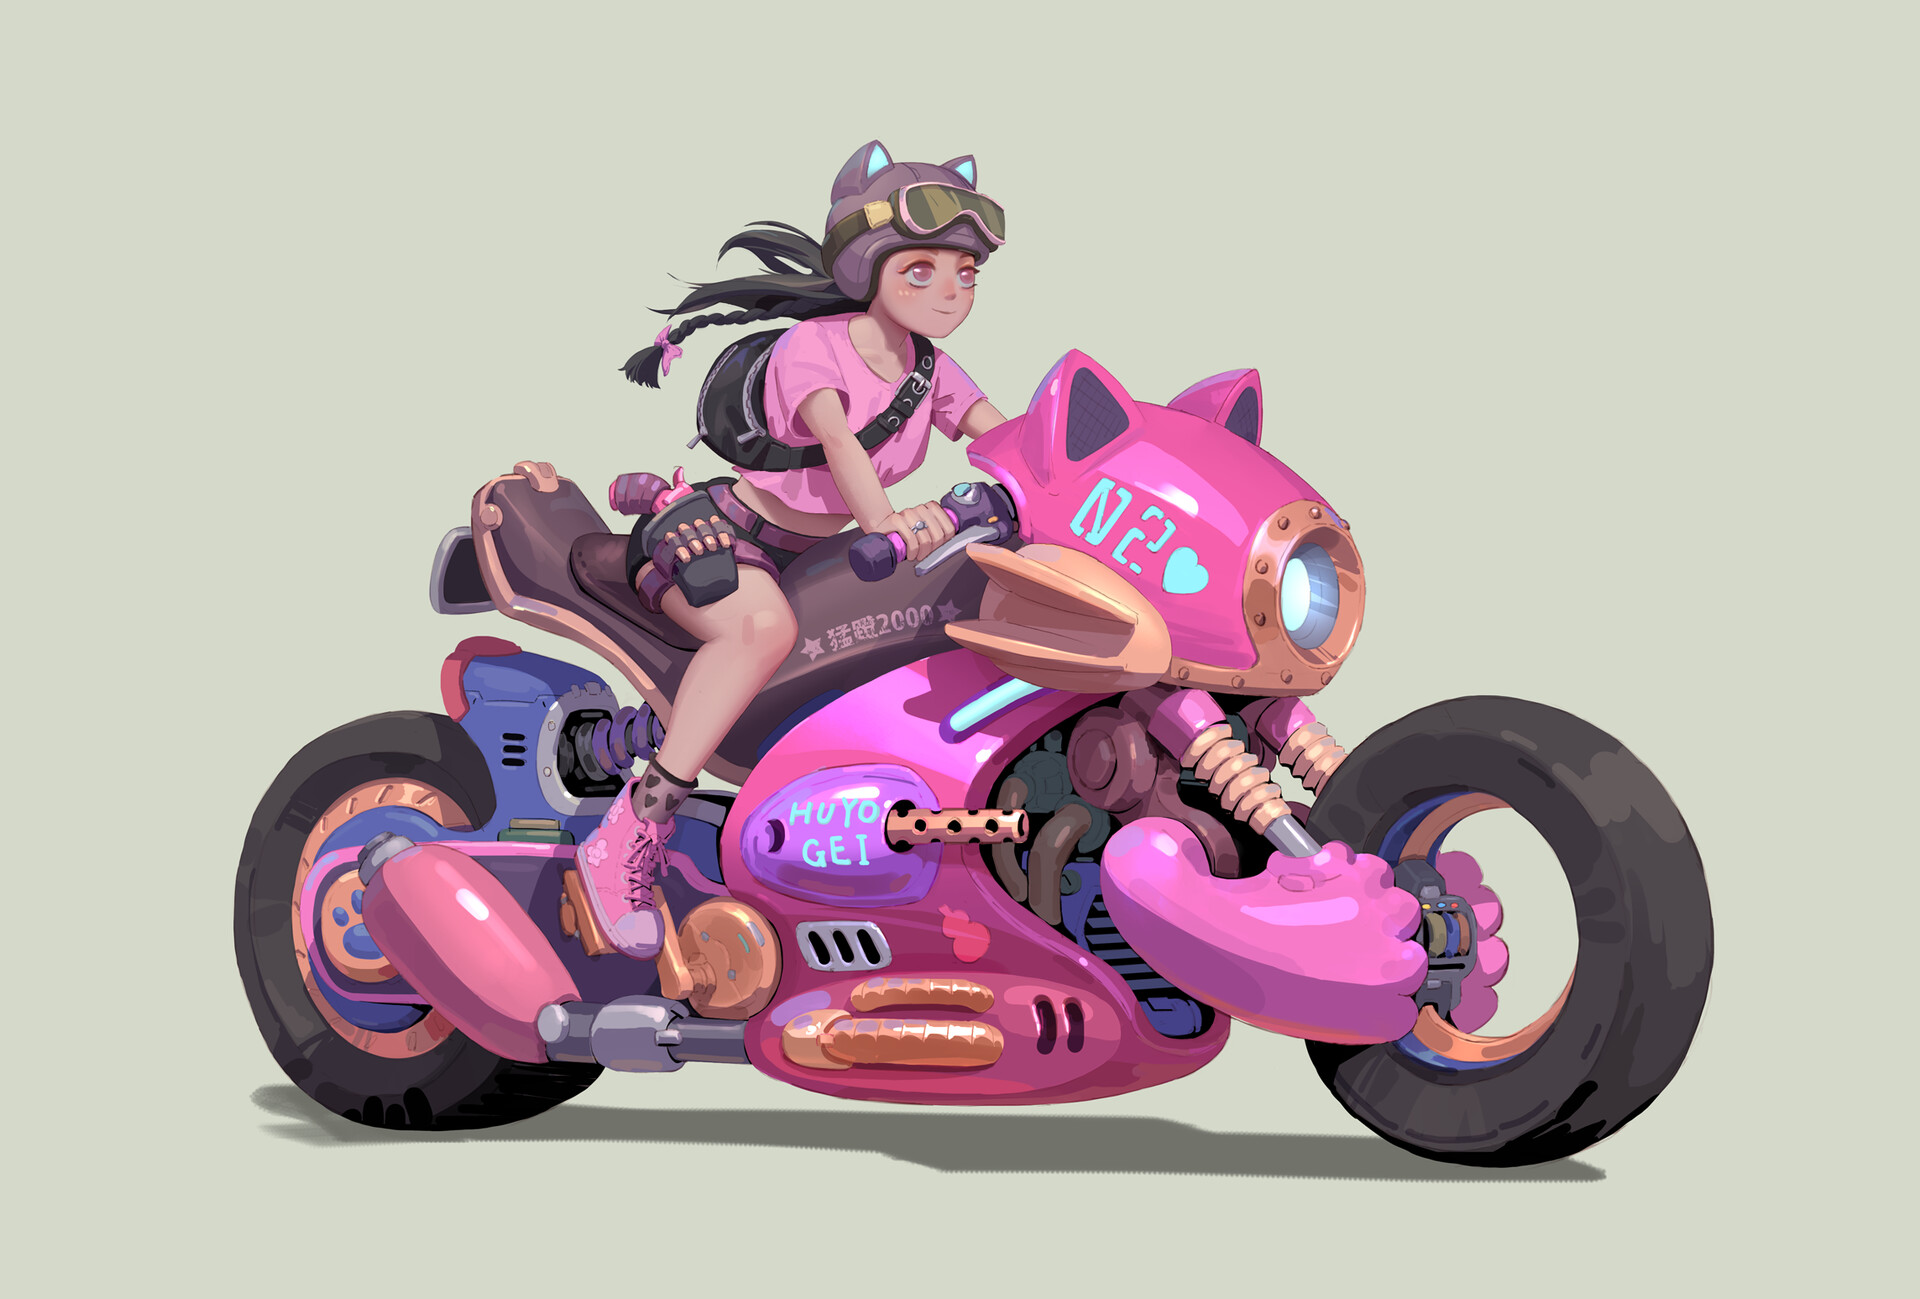 Artwork Rui Zhang Motorcycle Women With Motorcycles Simple Background Pink Shoes Pink Clothing Helme 1920x1299